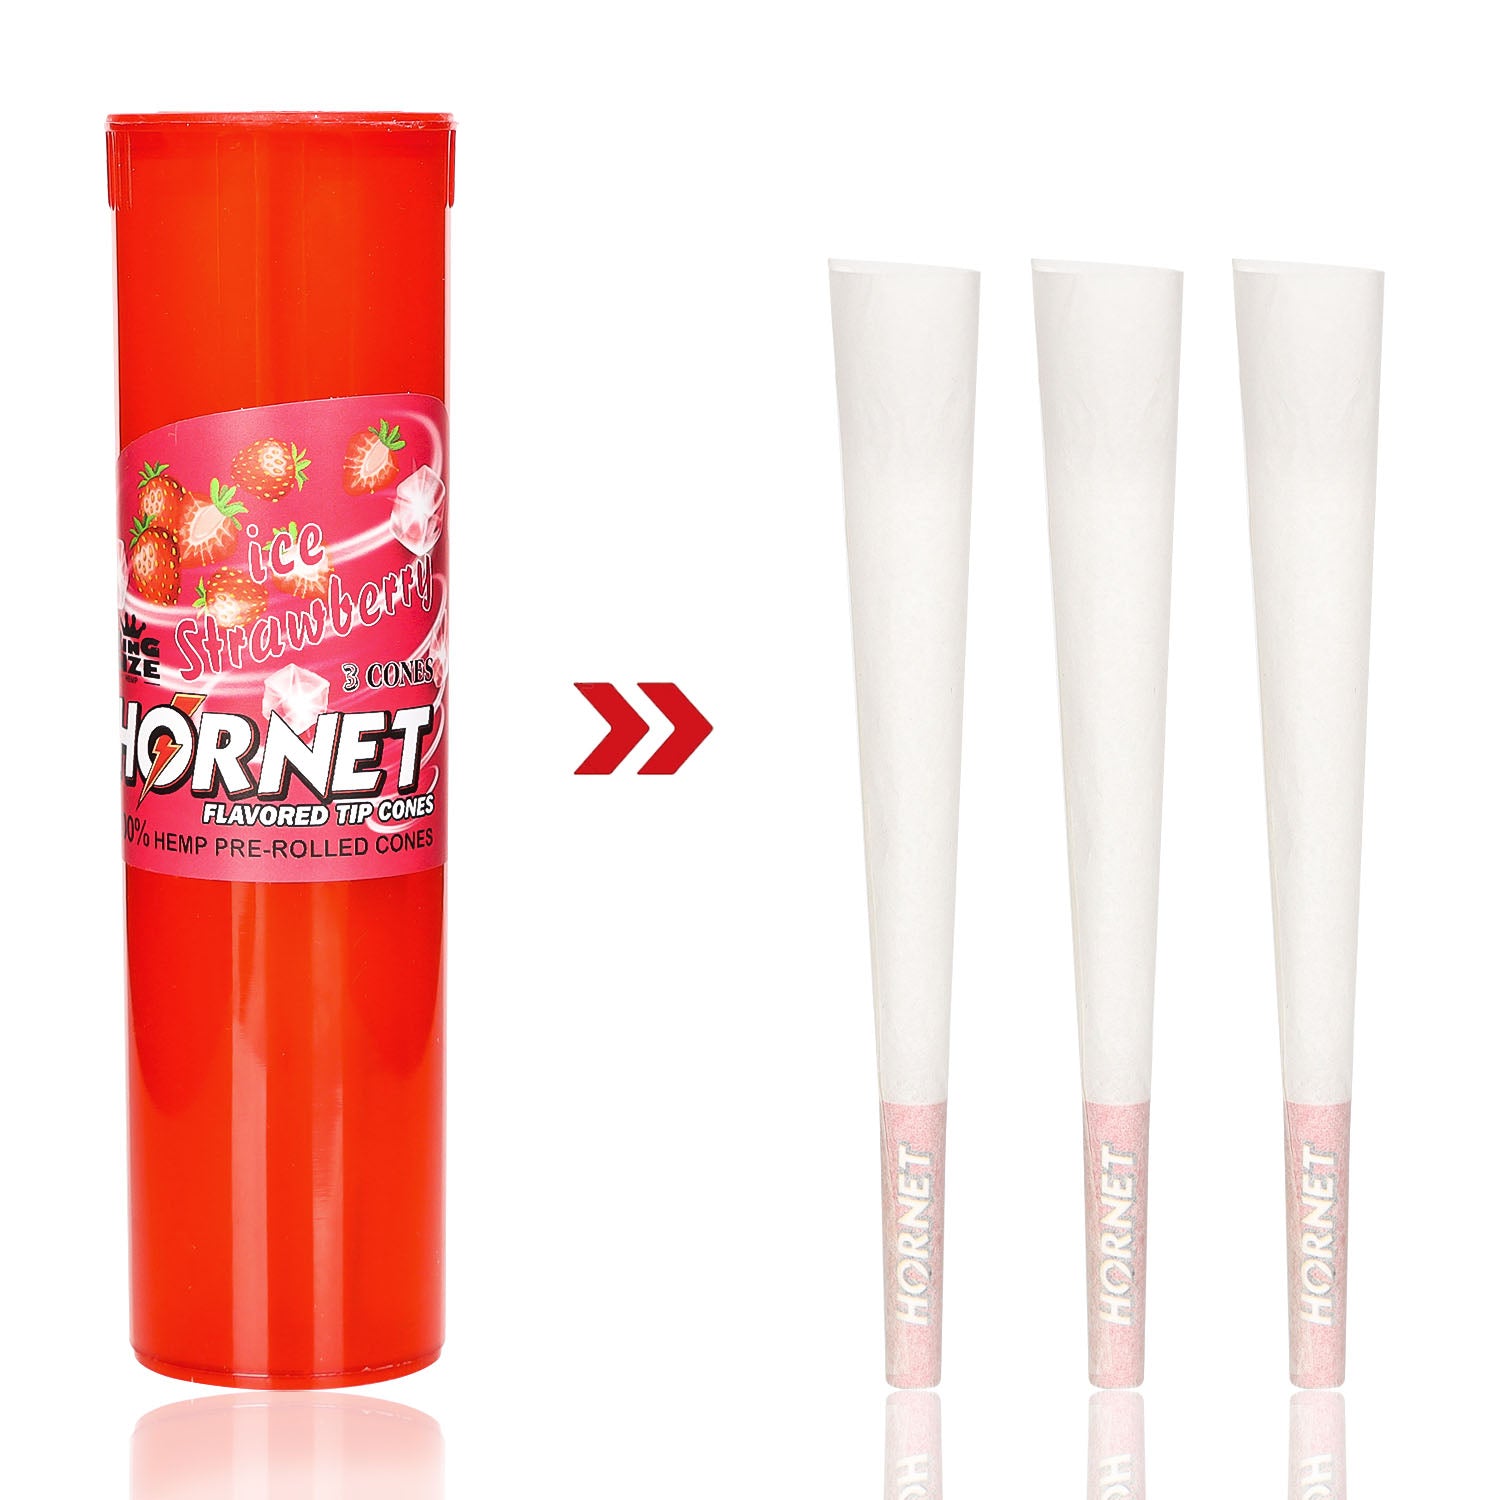 HORNET Strawberry Flavors Pre Rolled Cones, King Size Pre Rolled Rolling Paper With Tips, Slow Burning Rolling Cones & Flavored Pop, 3 PCS / Tube, 12 Tubes / Box